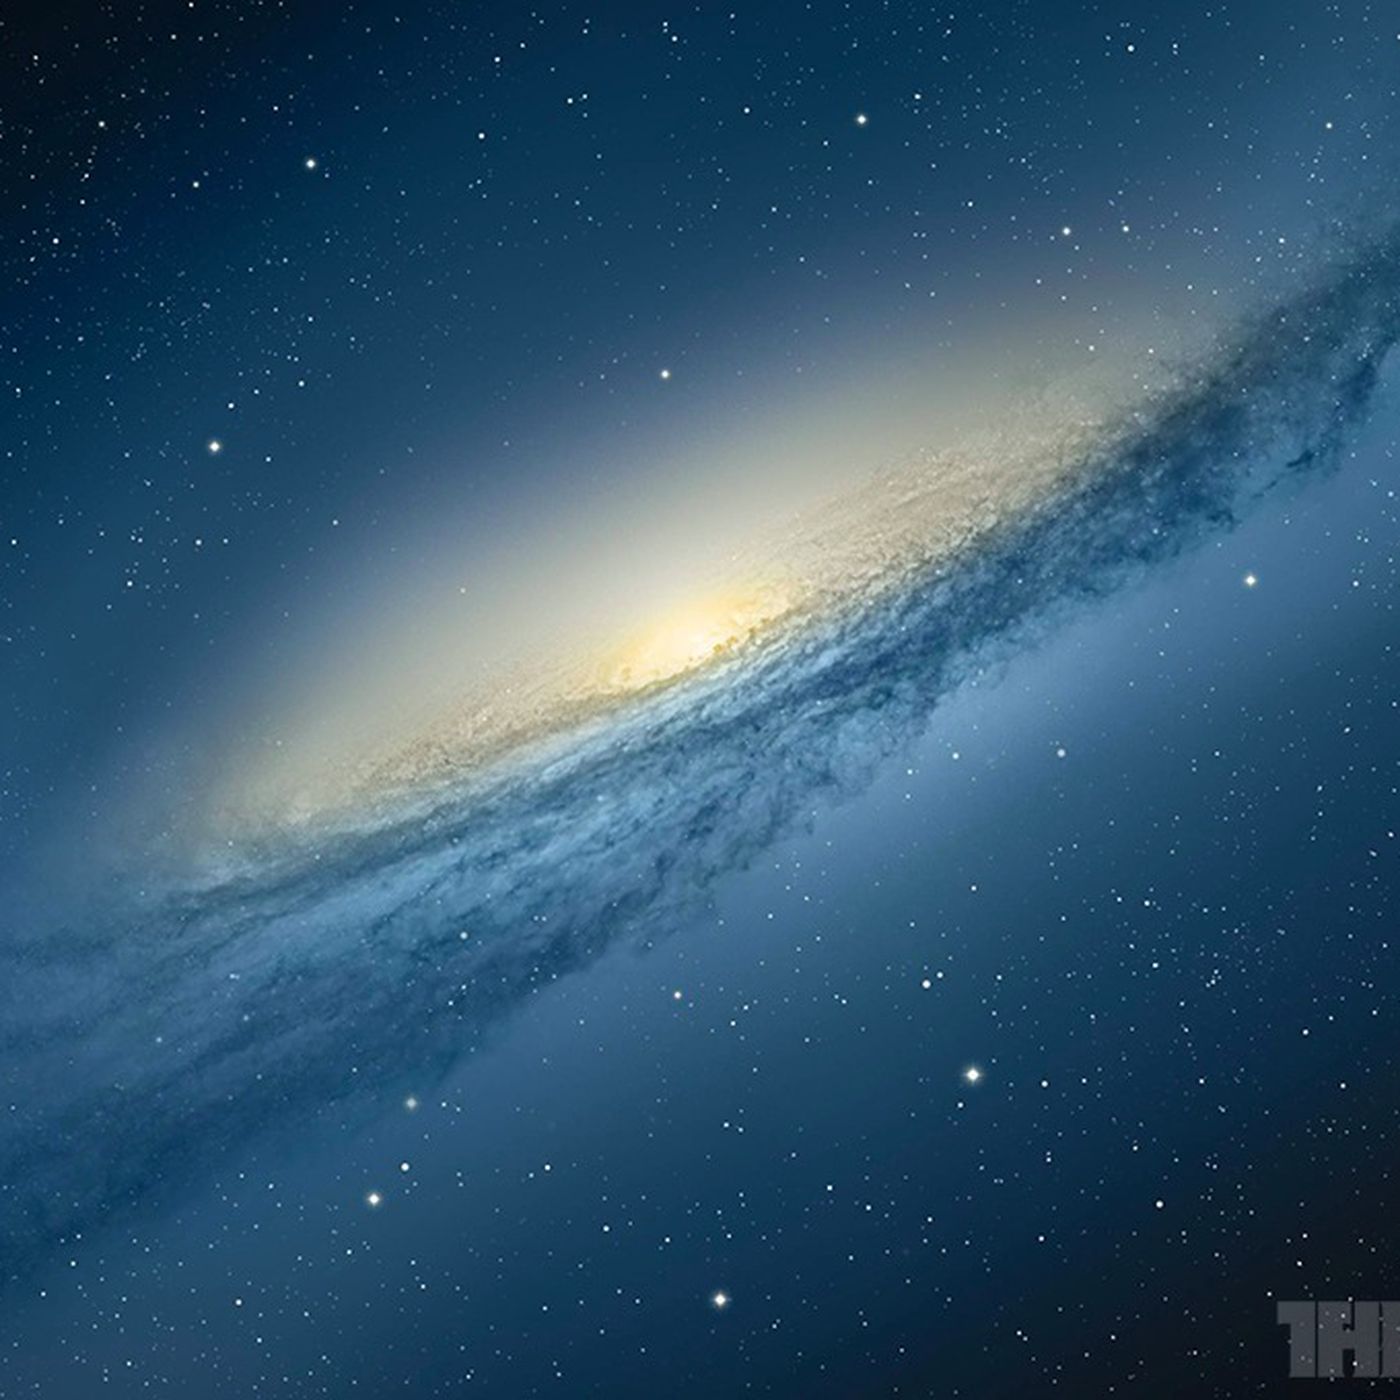 Apple erases another few galaxies for Mountain Lion wallpaper - The Verge